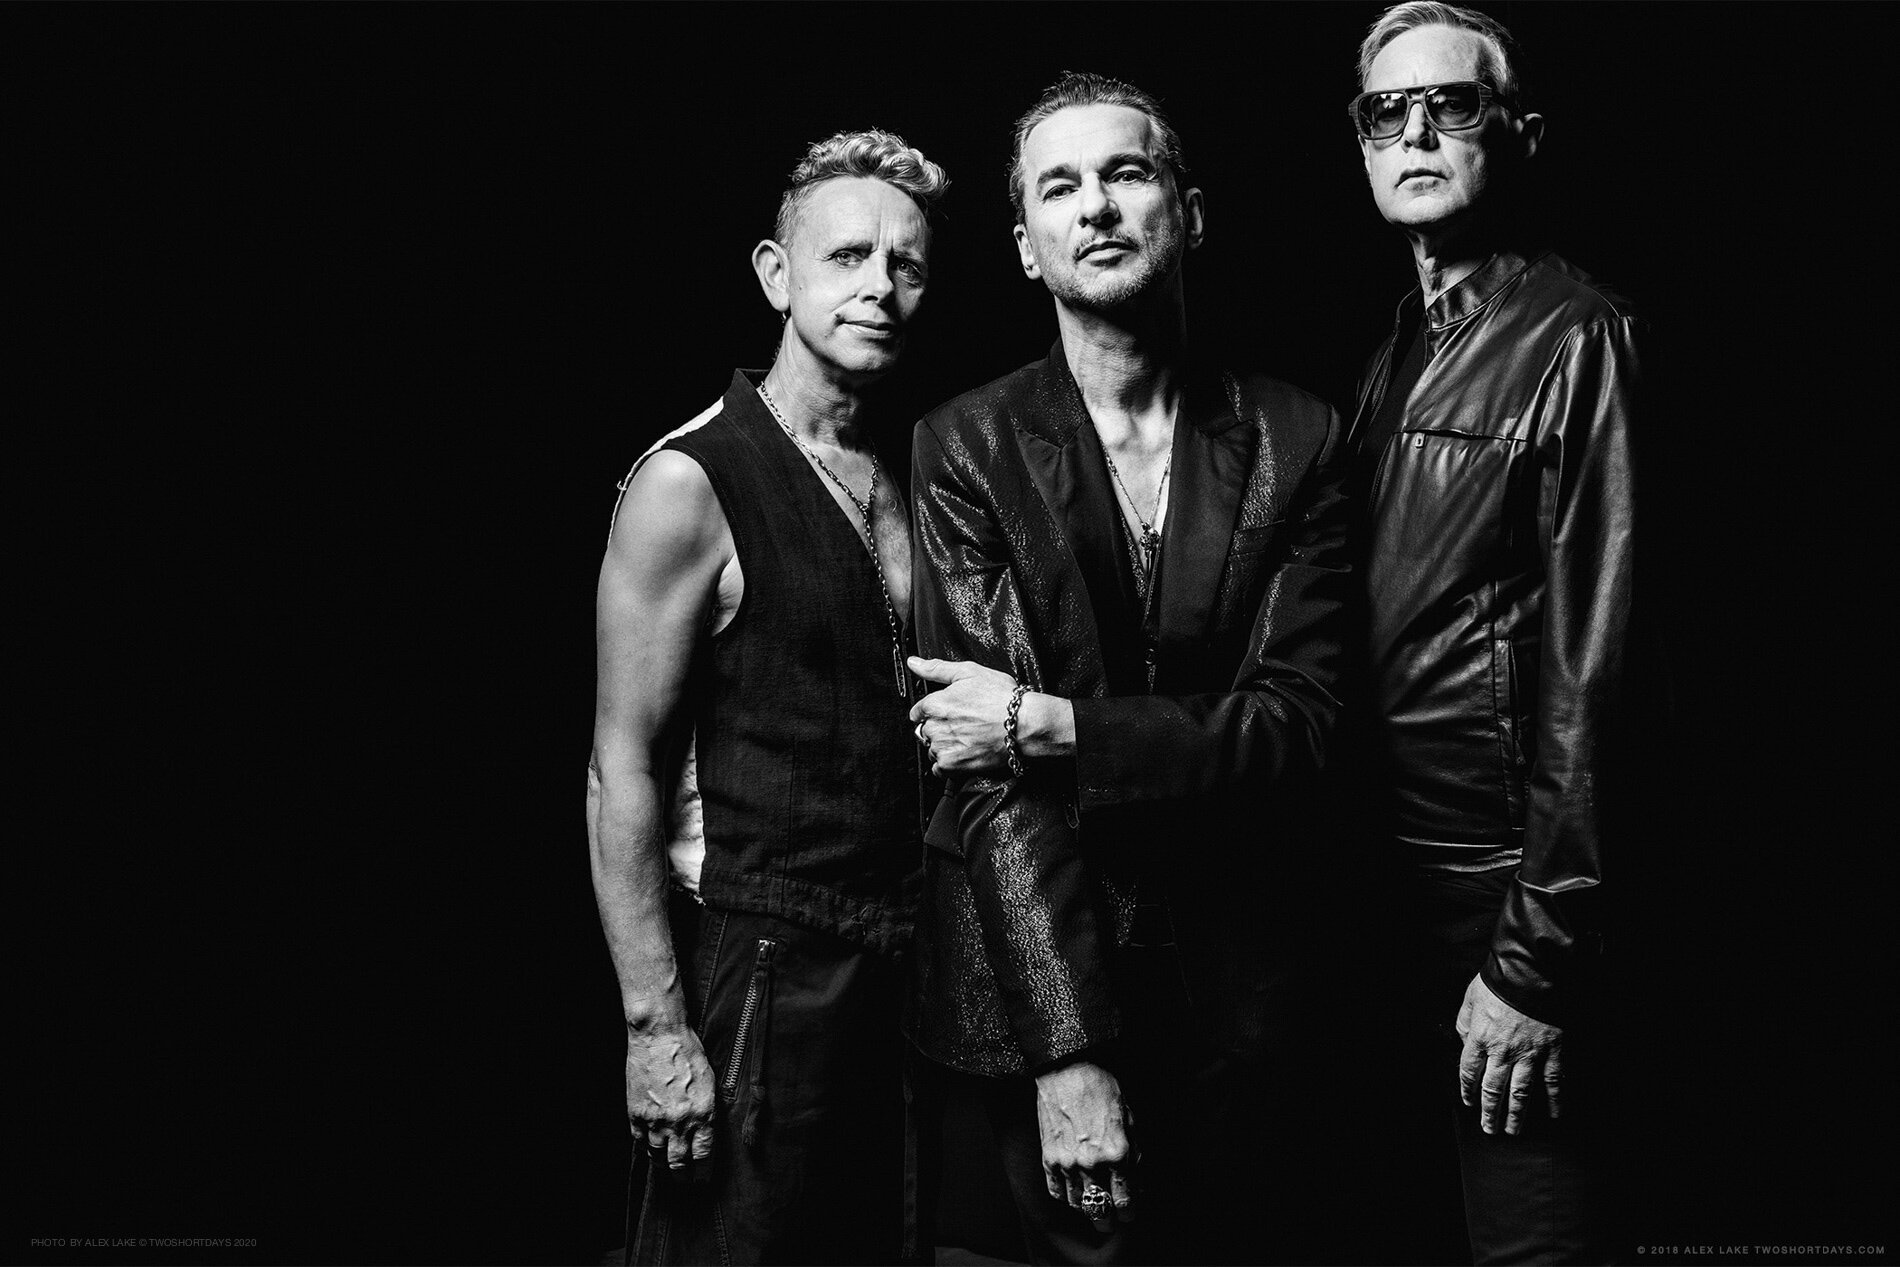 depeche_mode_photography_copyright_ALEX_LAKE_do_not_reproduce_without_permission_TWOSHORTDAYS.jpg